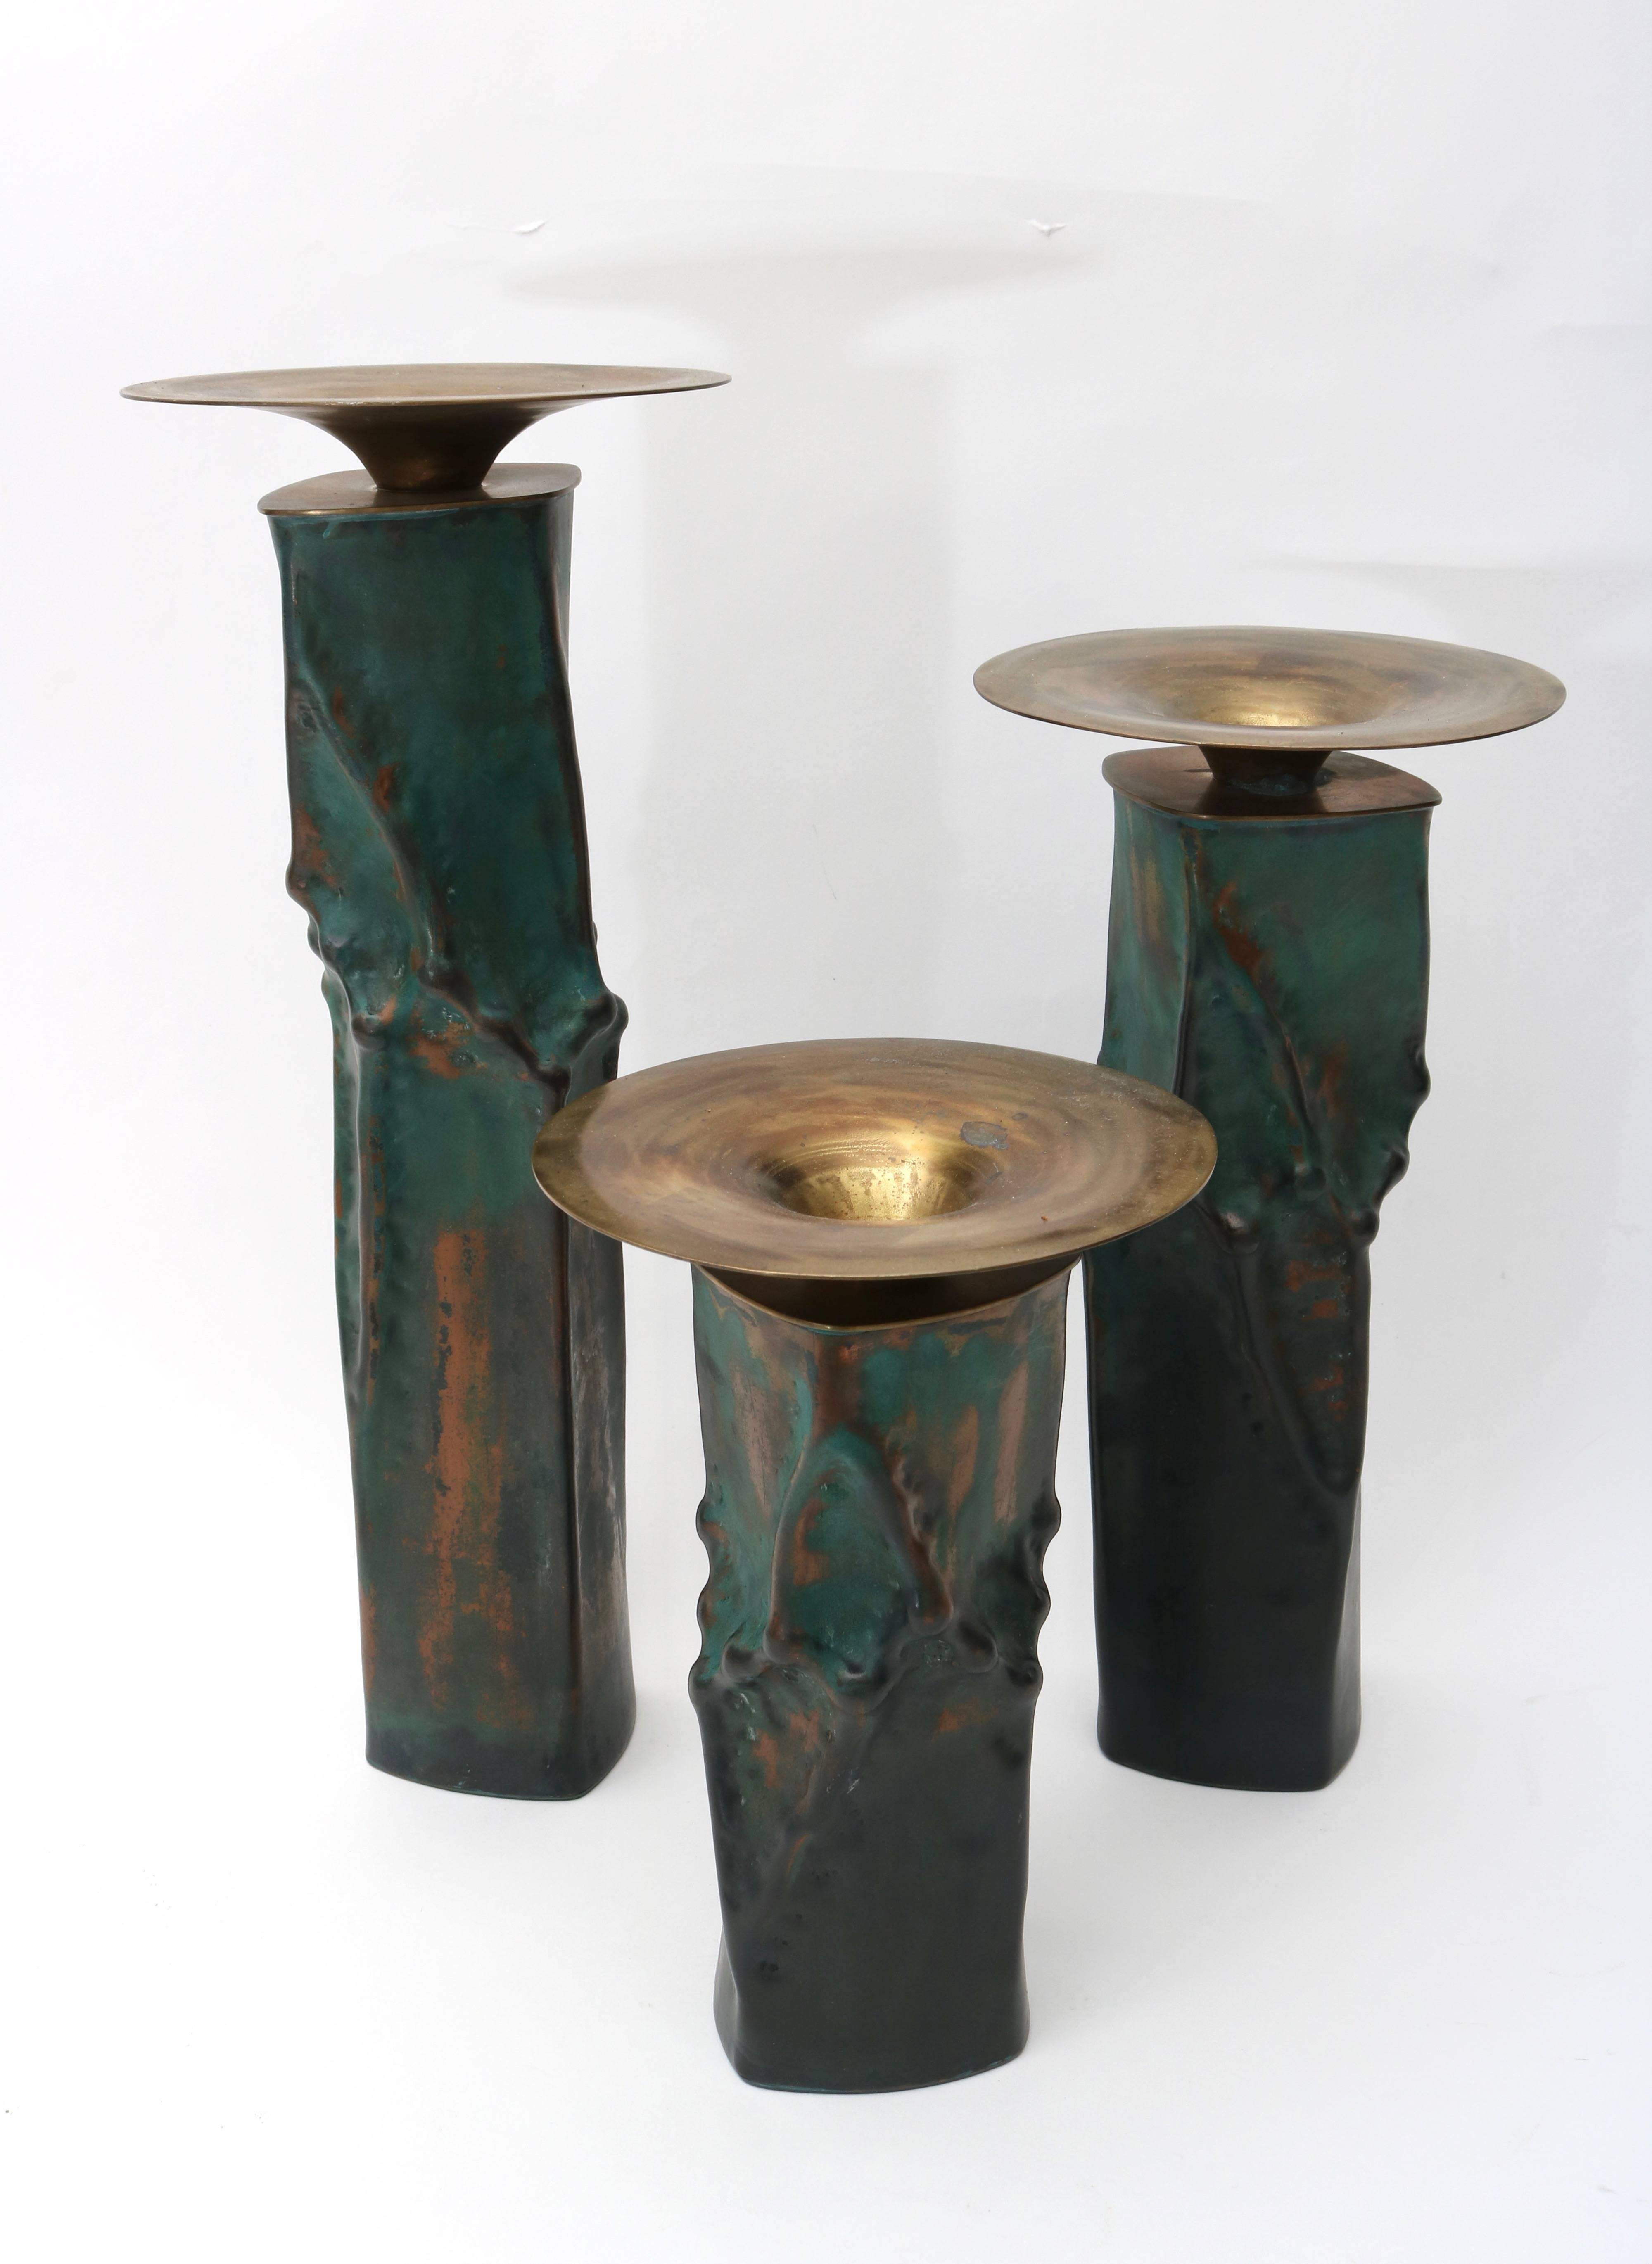 This set of three candleholders are by an American firm but unfortunately the incised signature is illegible (see underside photo #10). They are fabricated in copper and brass and which was the perfect choice for their Brutalist form and